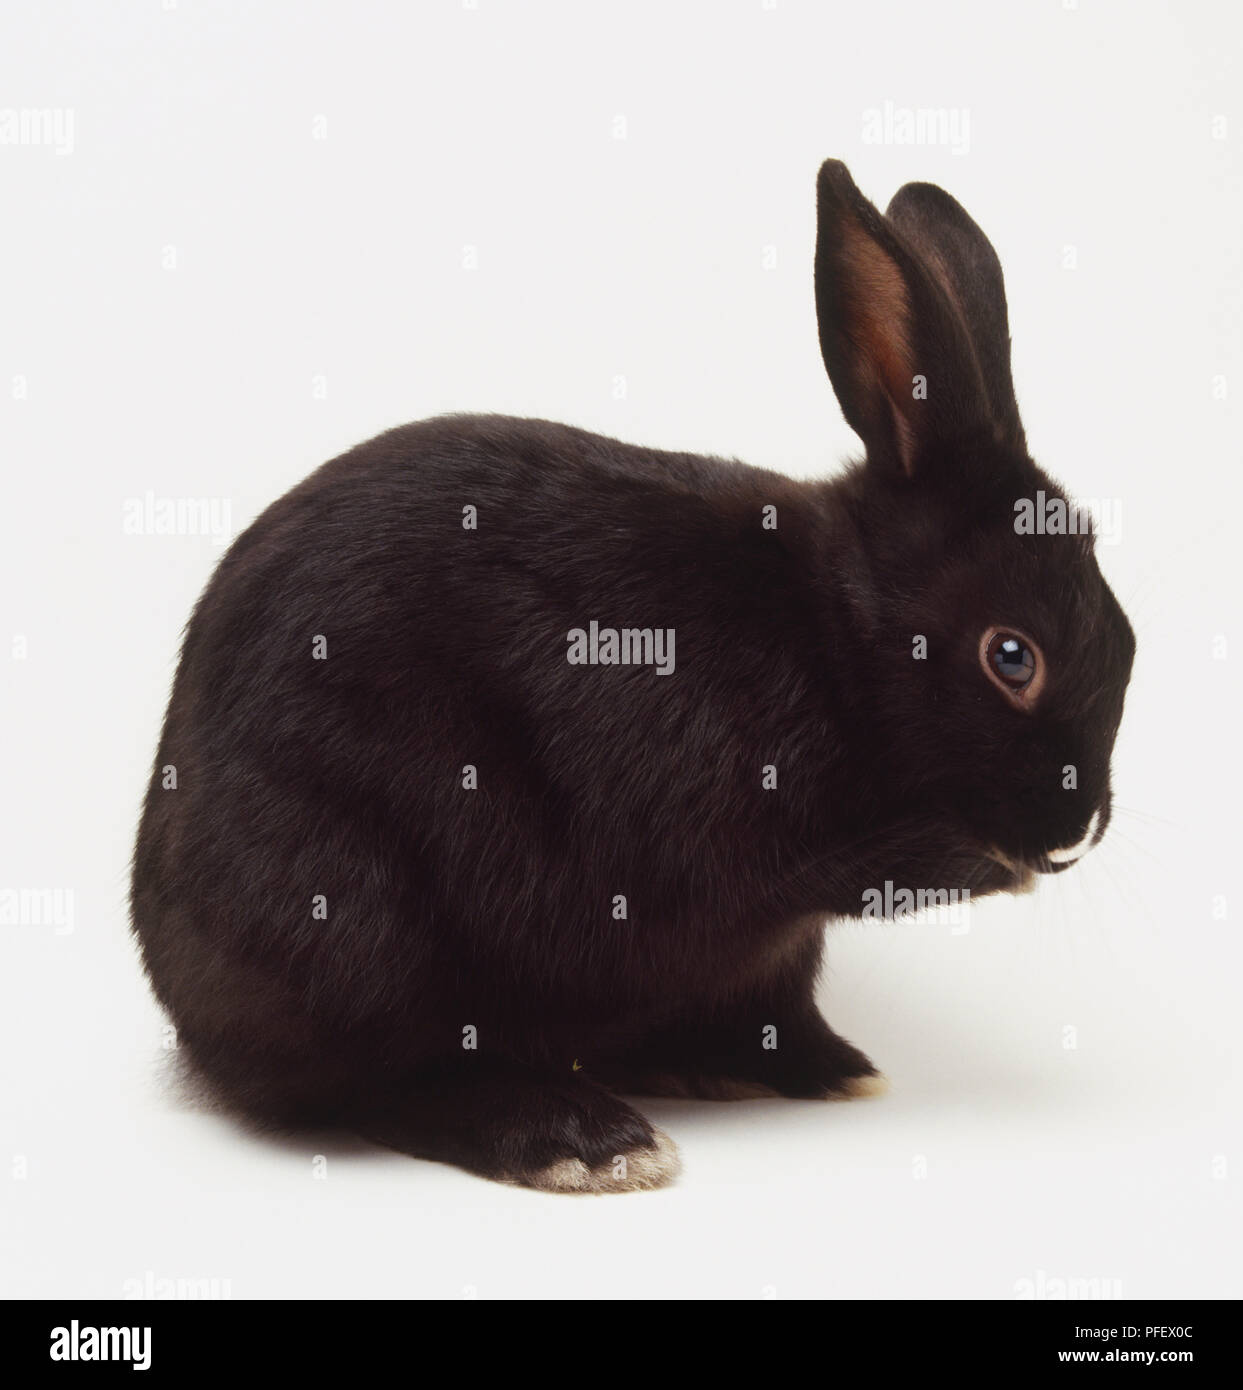 Black Domestic Rabbit (Oryctolagus Cuniculus), side view Stock Photo